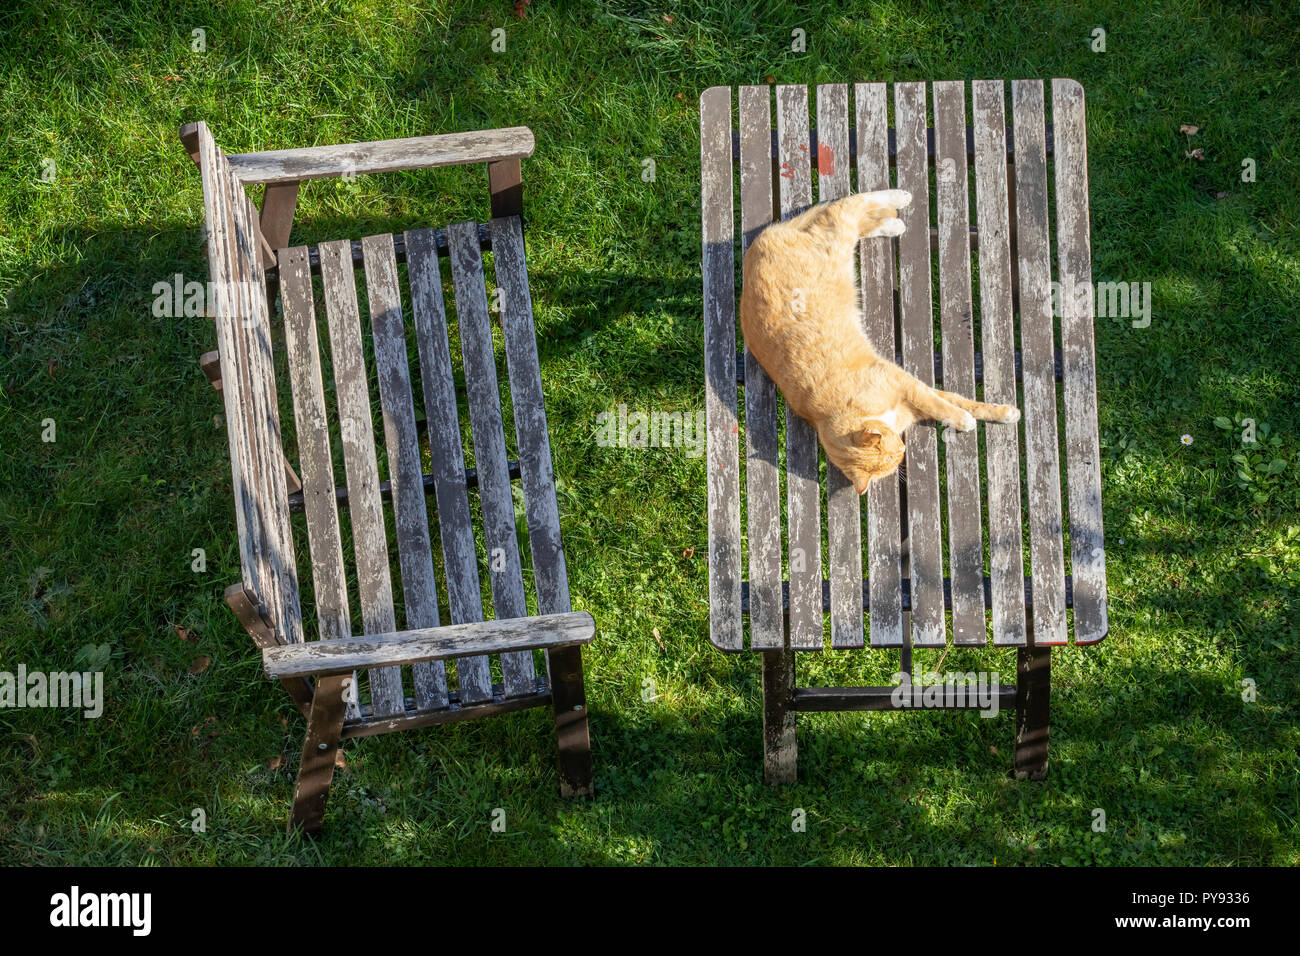 A cat lies in the sun on a wooden garden table Stock Photo